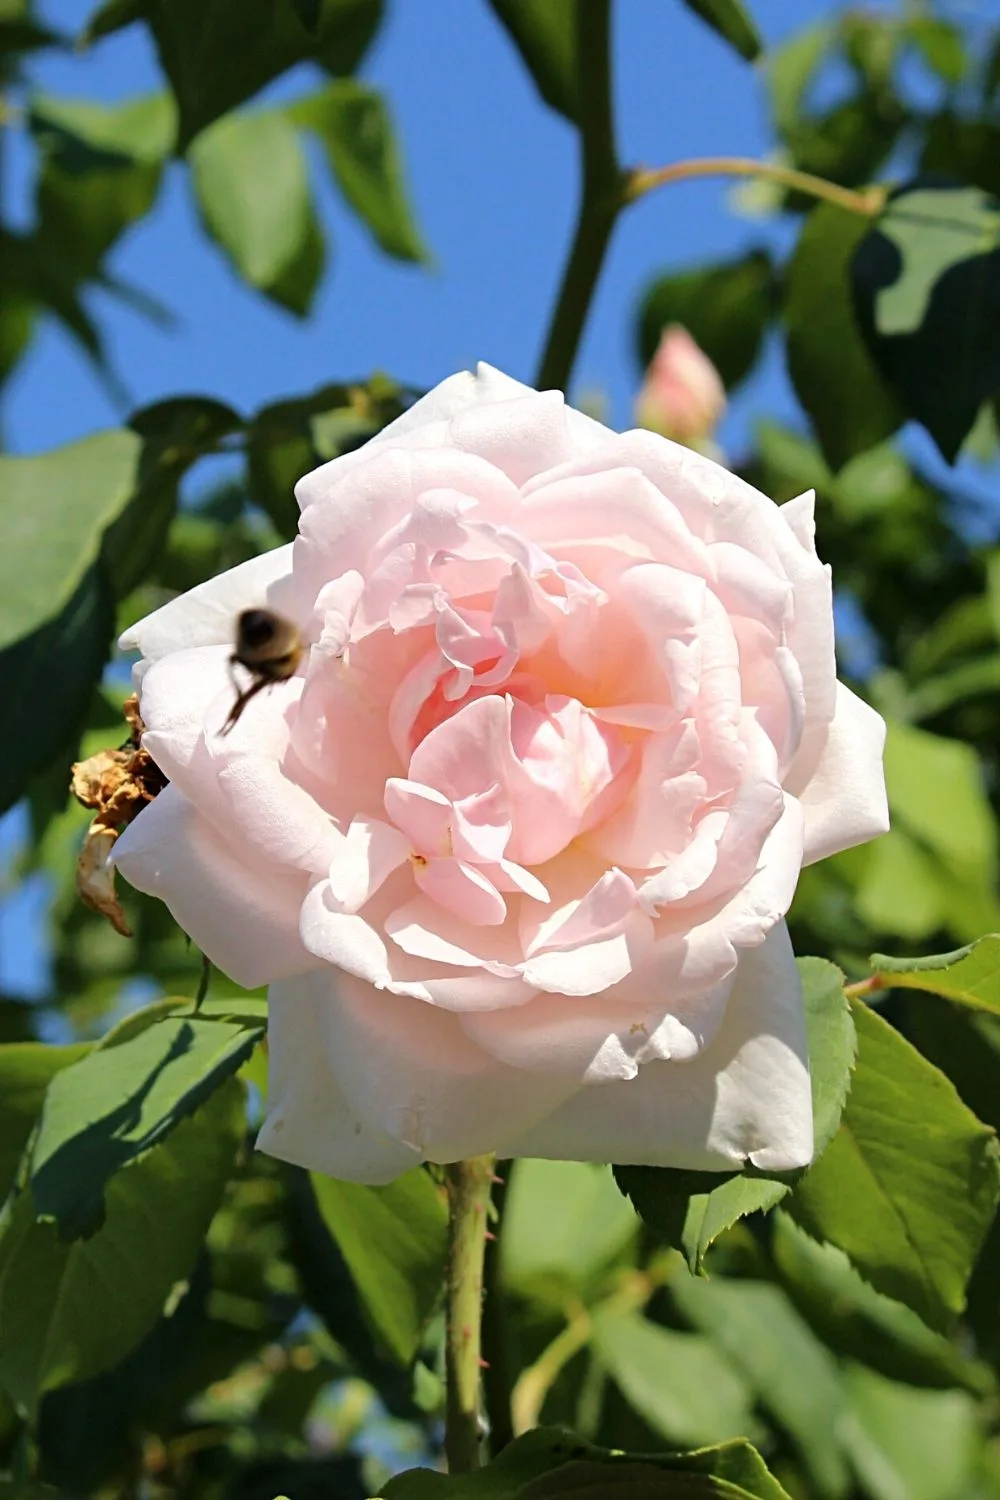 Madame Alfred Carrière' grows white flowers all year round, which can appear pink-tinted on the north-facing side of the house